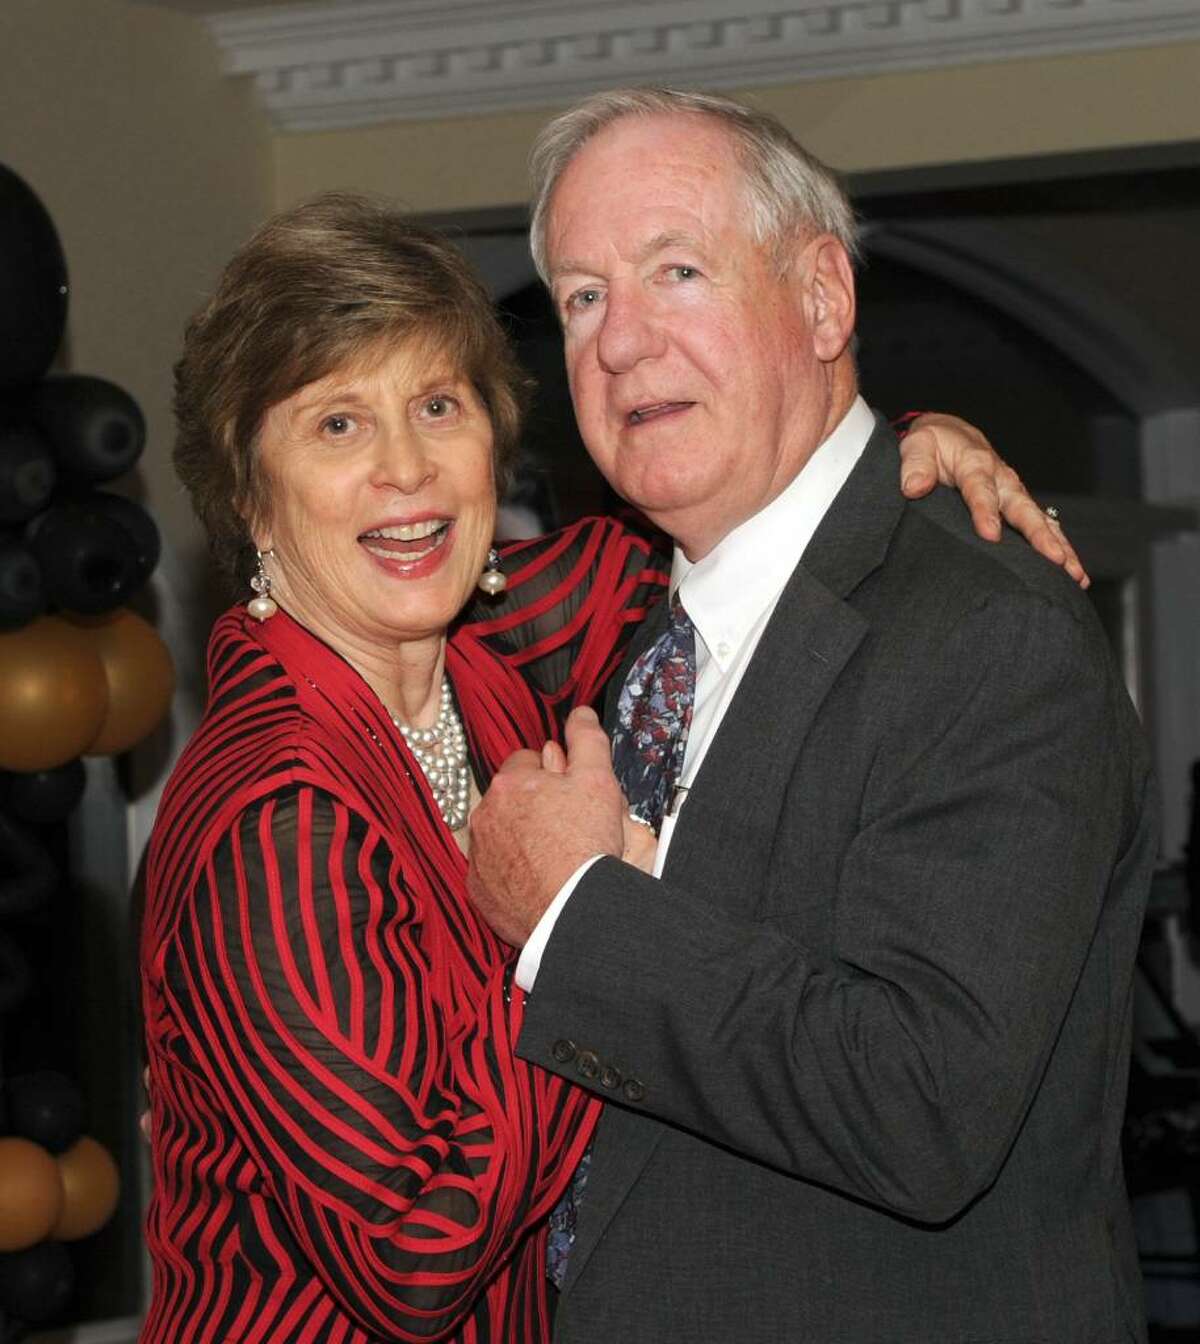 Former Brookfield First Selectman Jerry Murphy and his wife Susan, dance together at the Oscar Night Gala, Saturday, March 20, 2010.